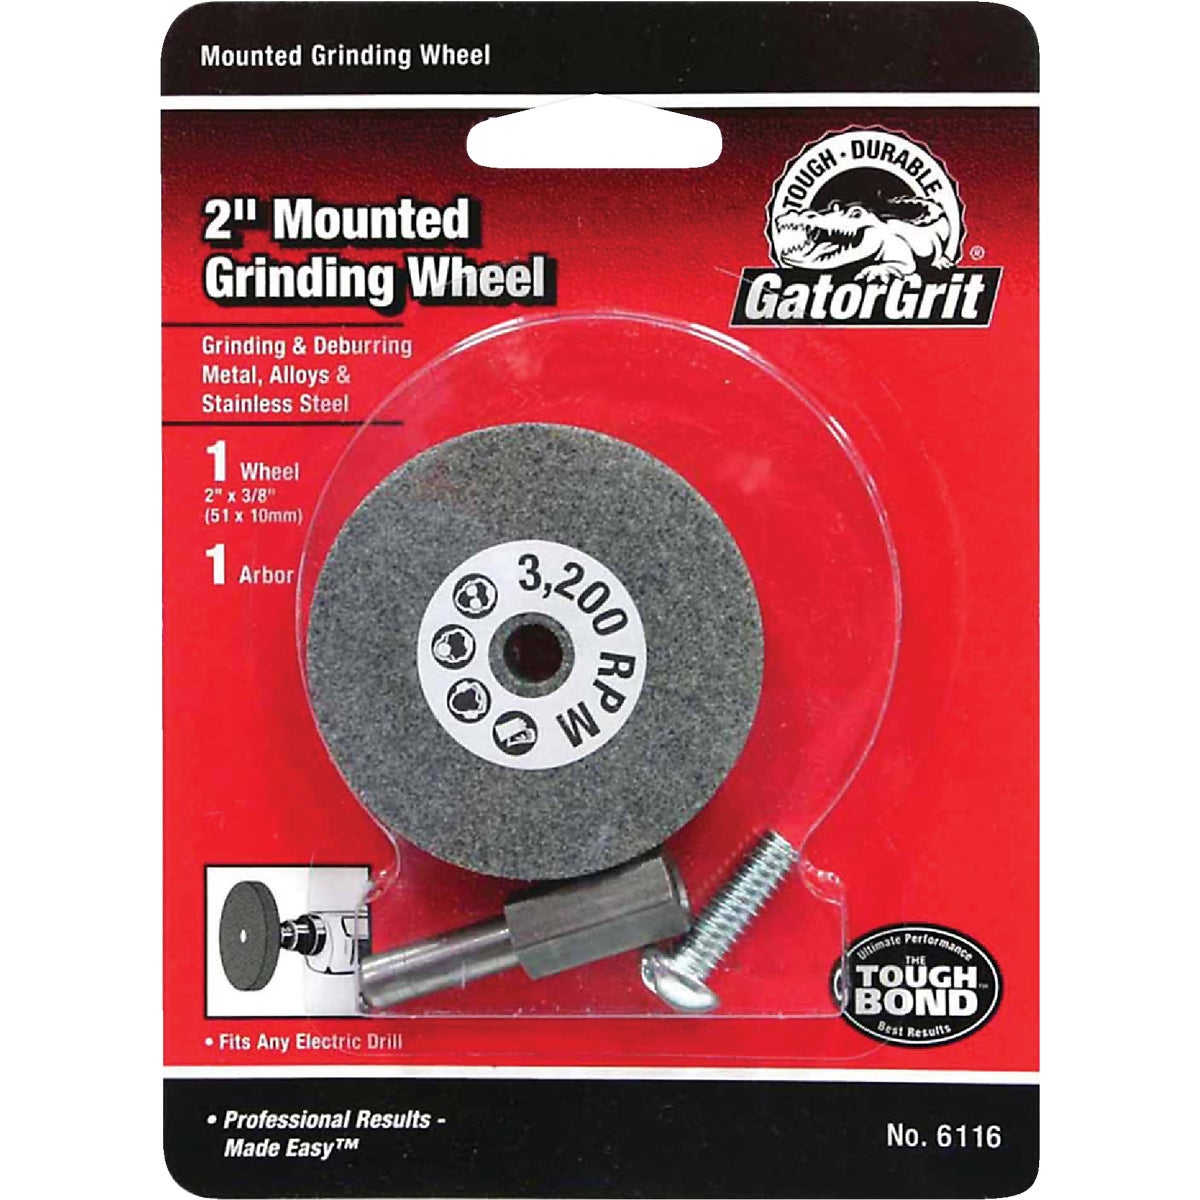 Item 373370, Aluminum oxide mounted grinding wheels with 1/4 In. arbor.